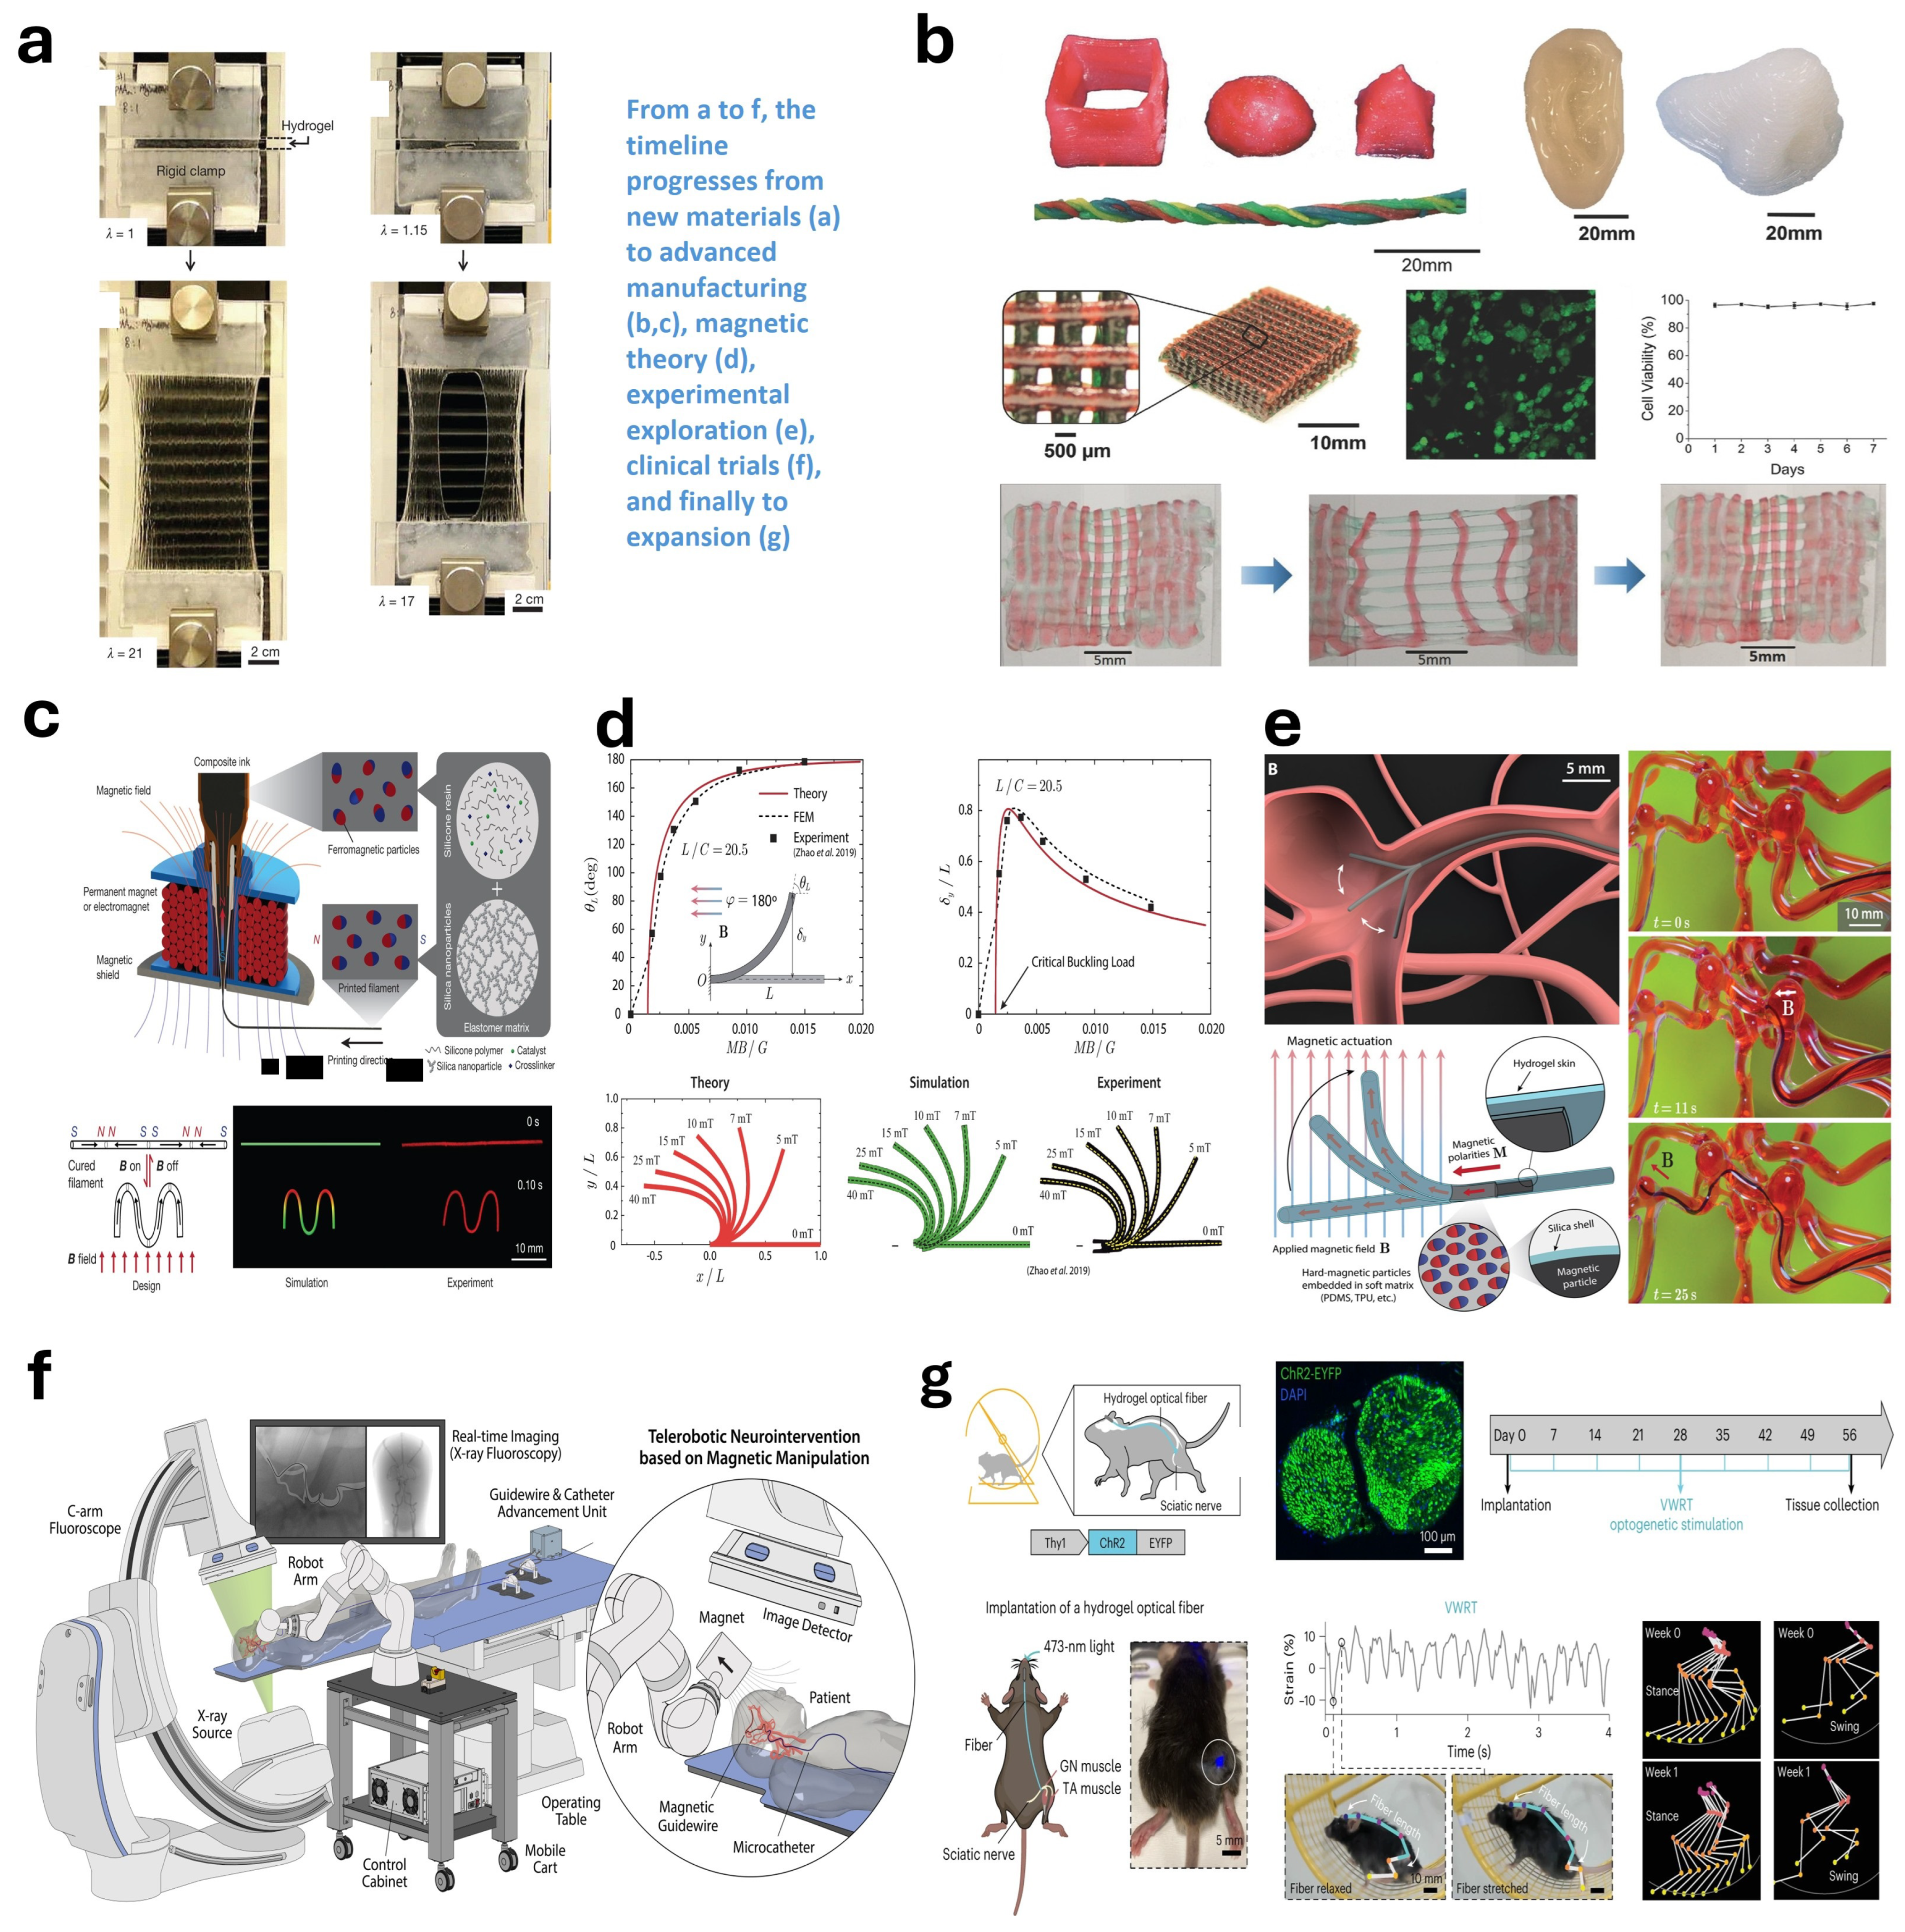 A multifunctional soft robotic shape display with high-speed actuation,  sensing, and control